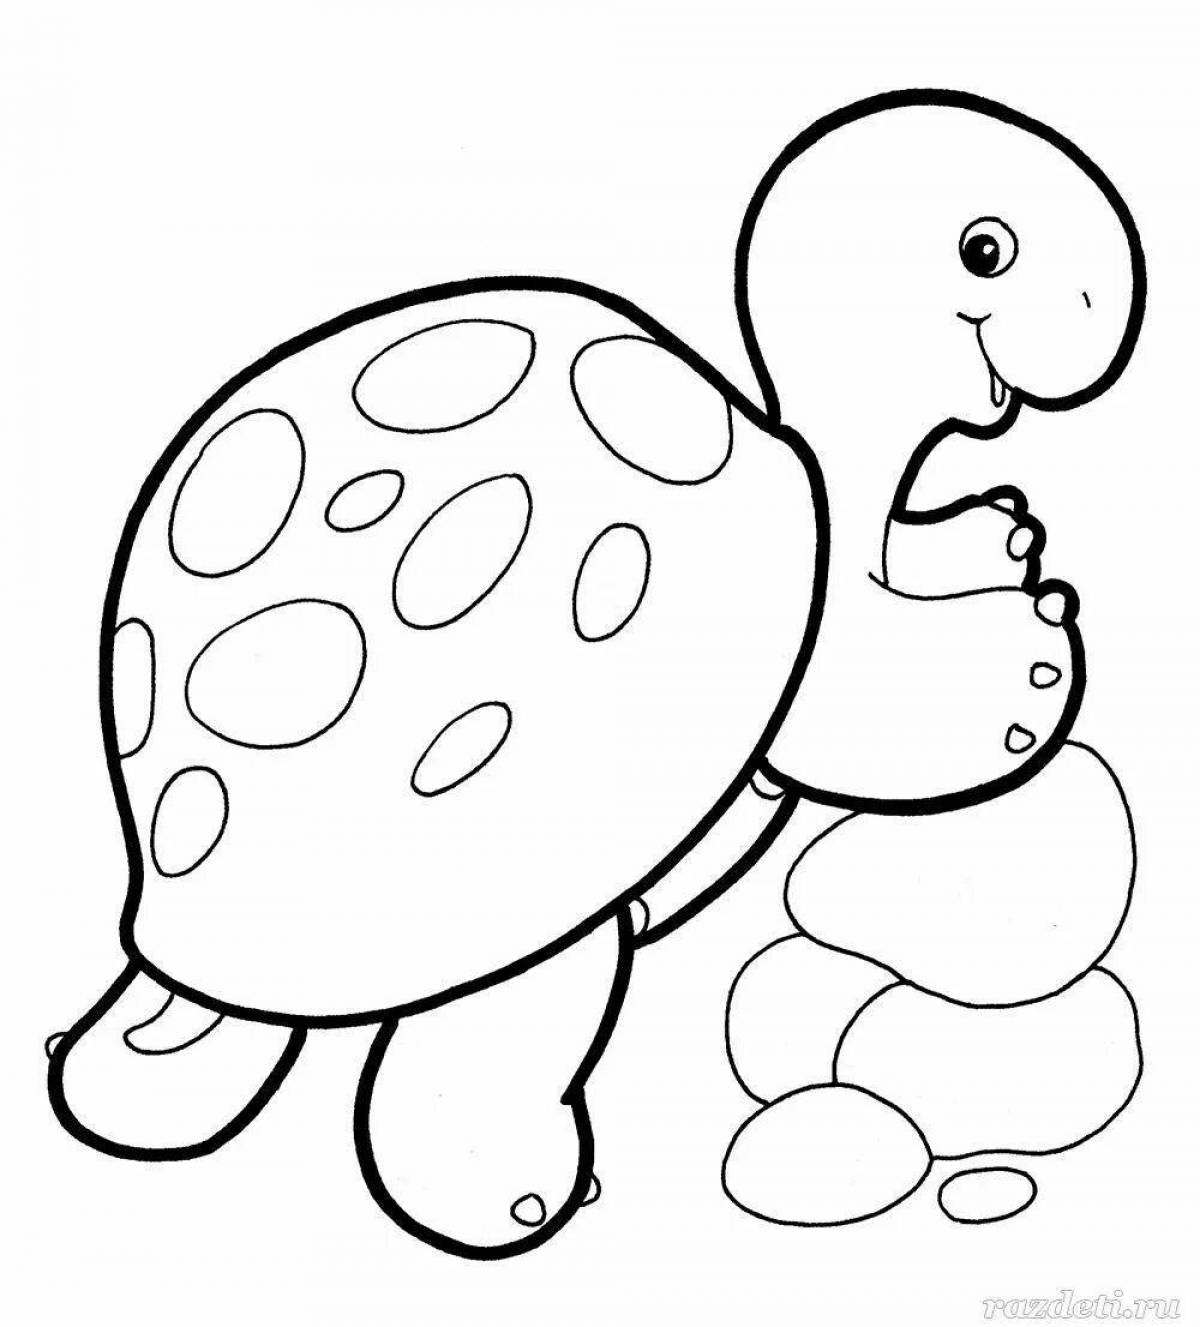 Shiny turtle coloring page